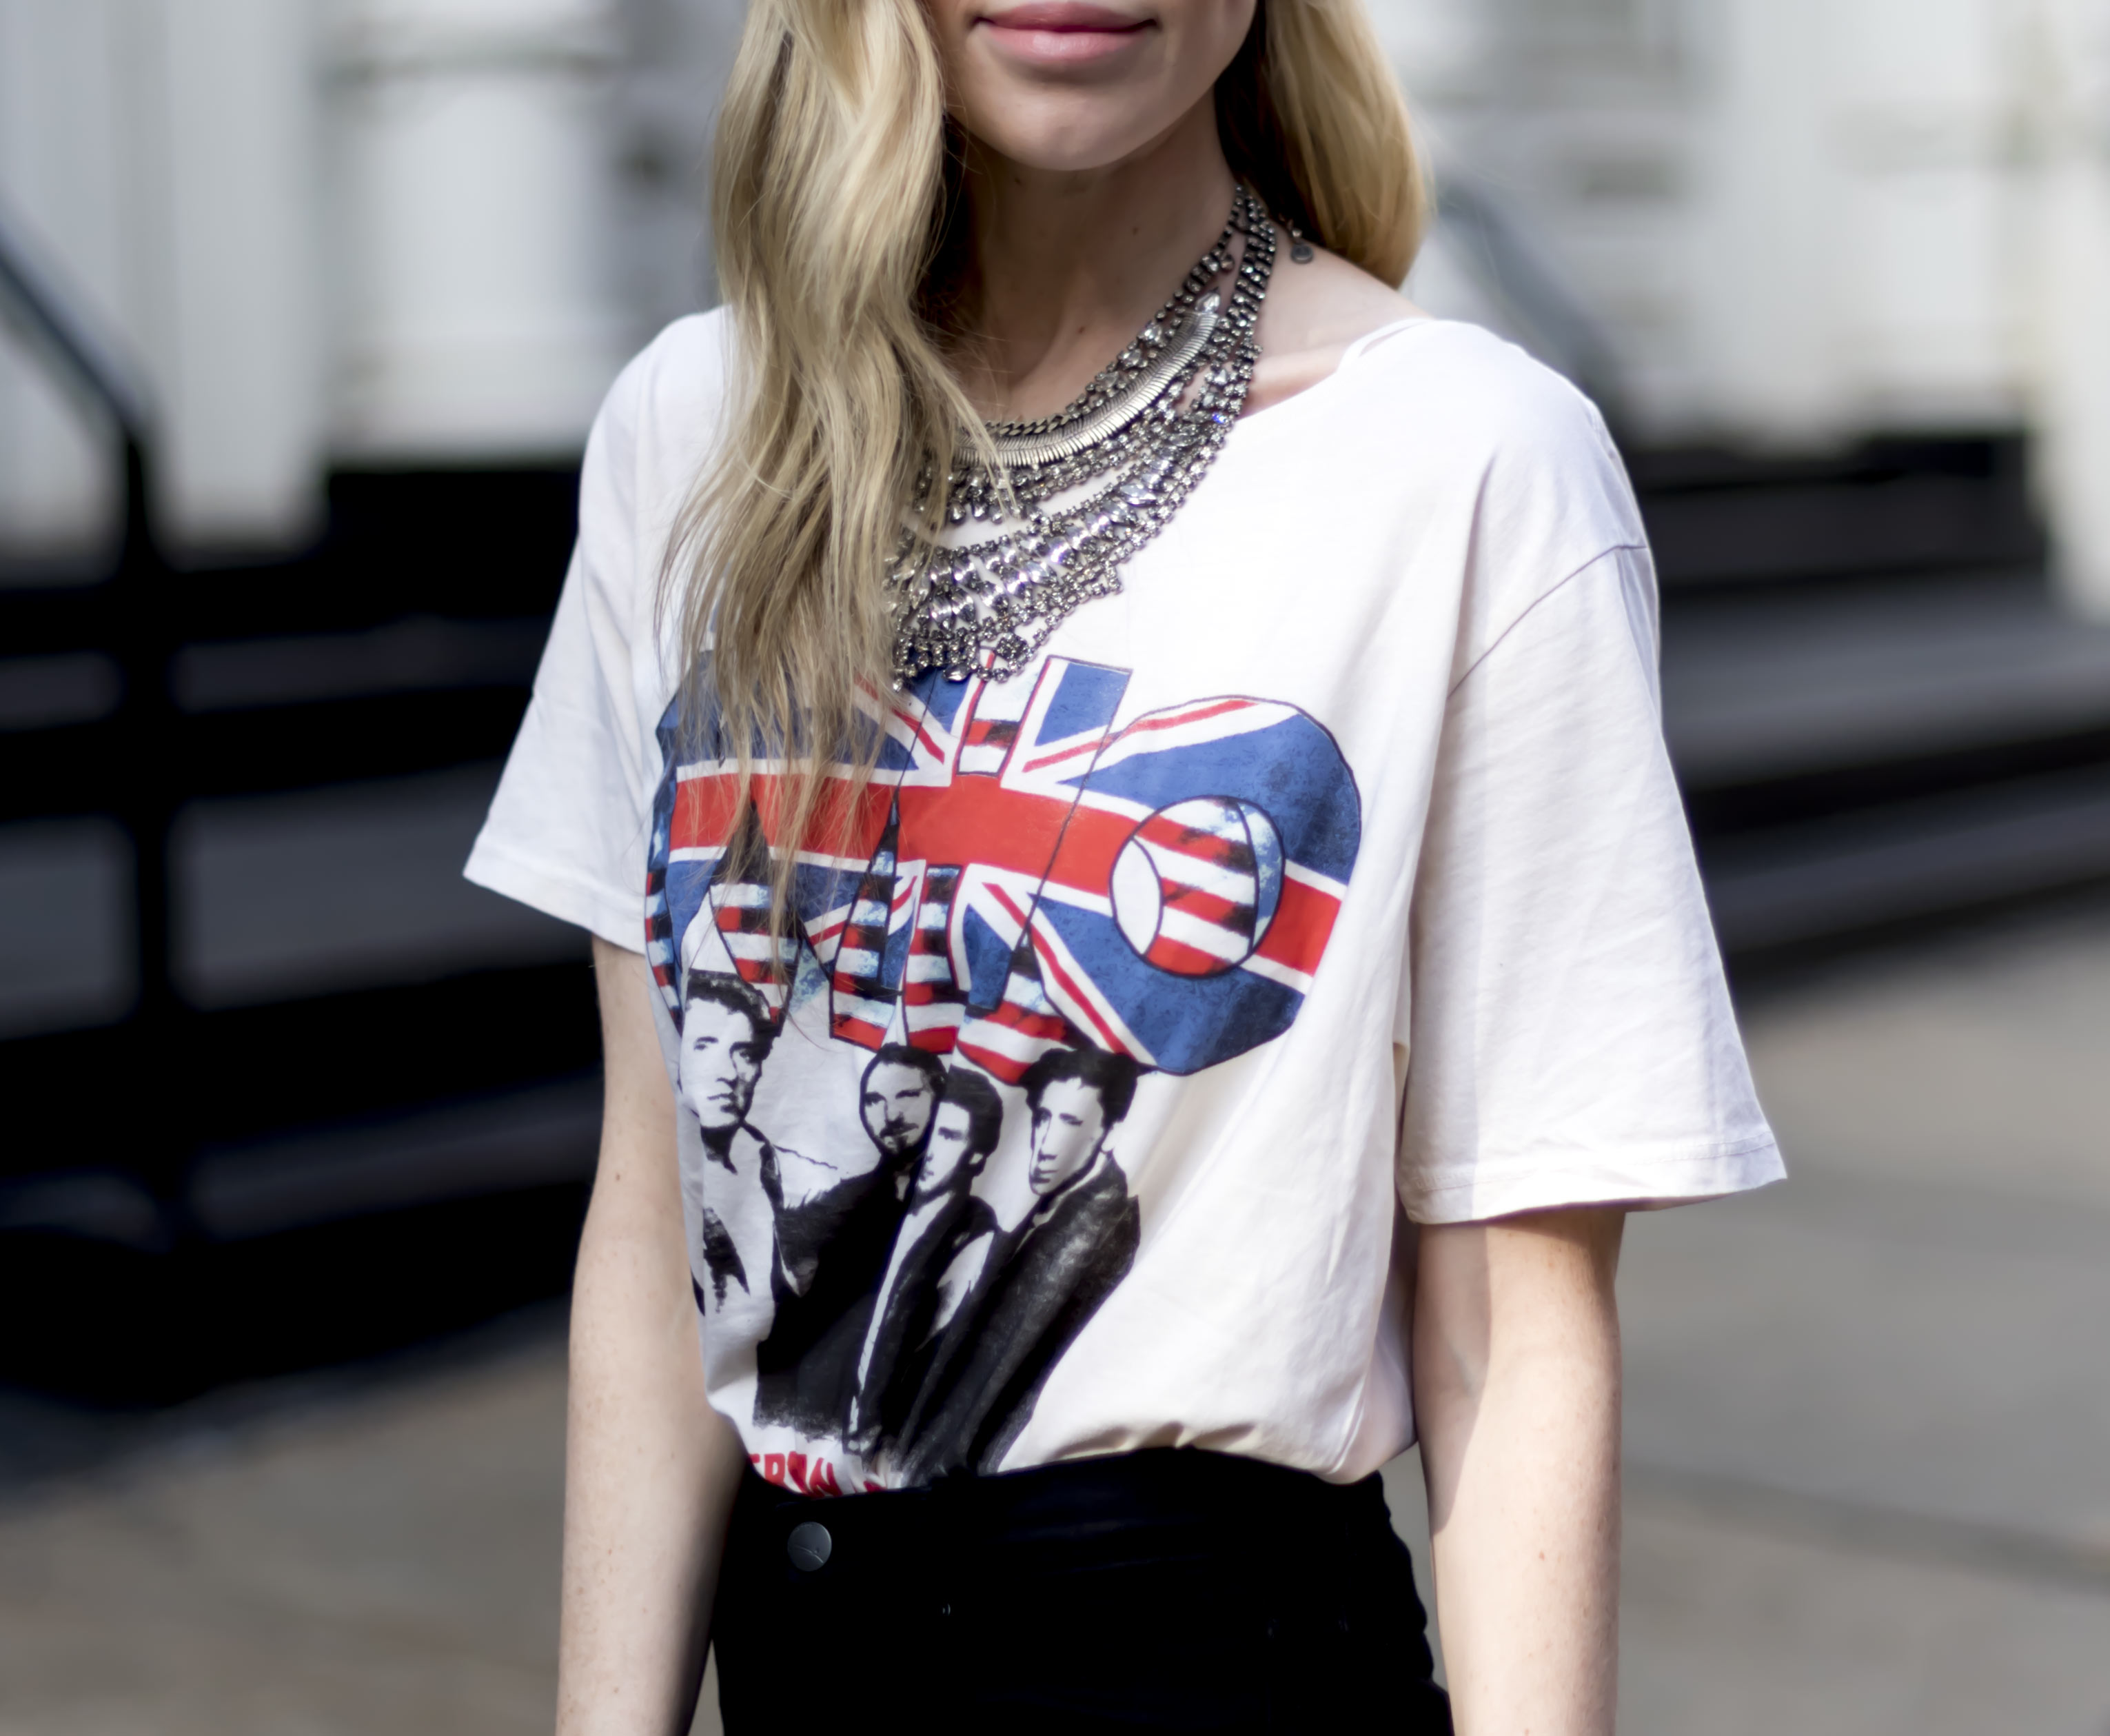 the-who-graphic-tee-yael-steren